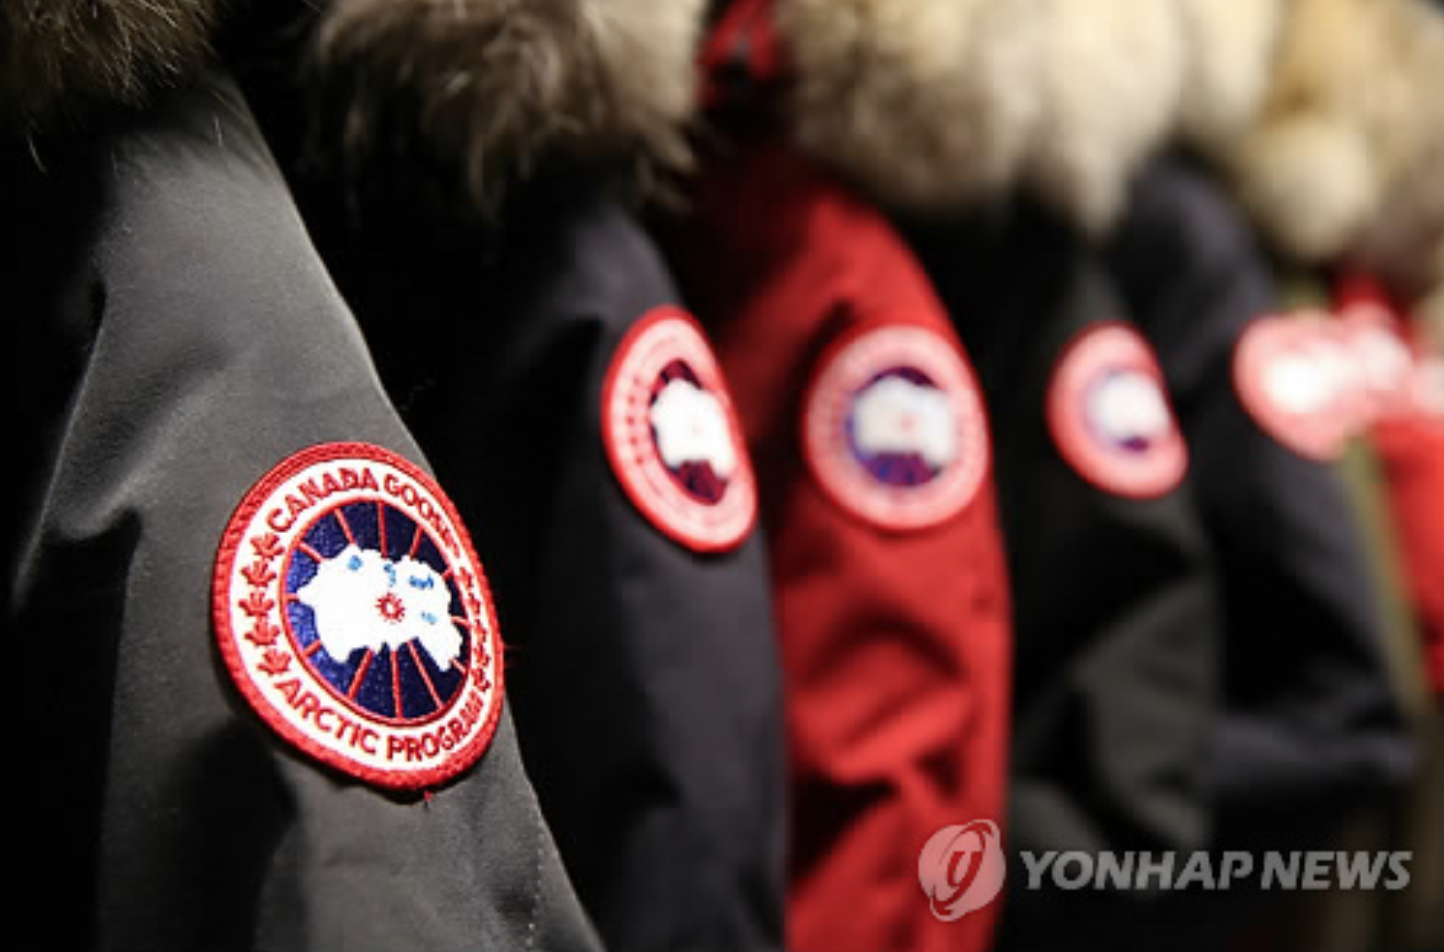 Black Friday Hype Leads To Counterfeit Canada Goose Victims Be Korea Savvy